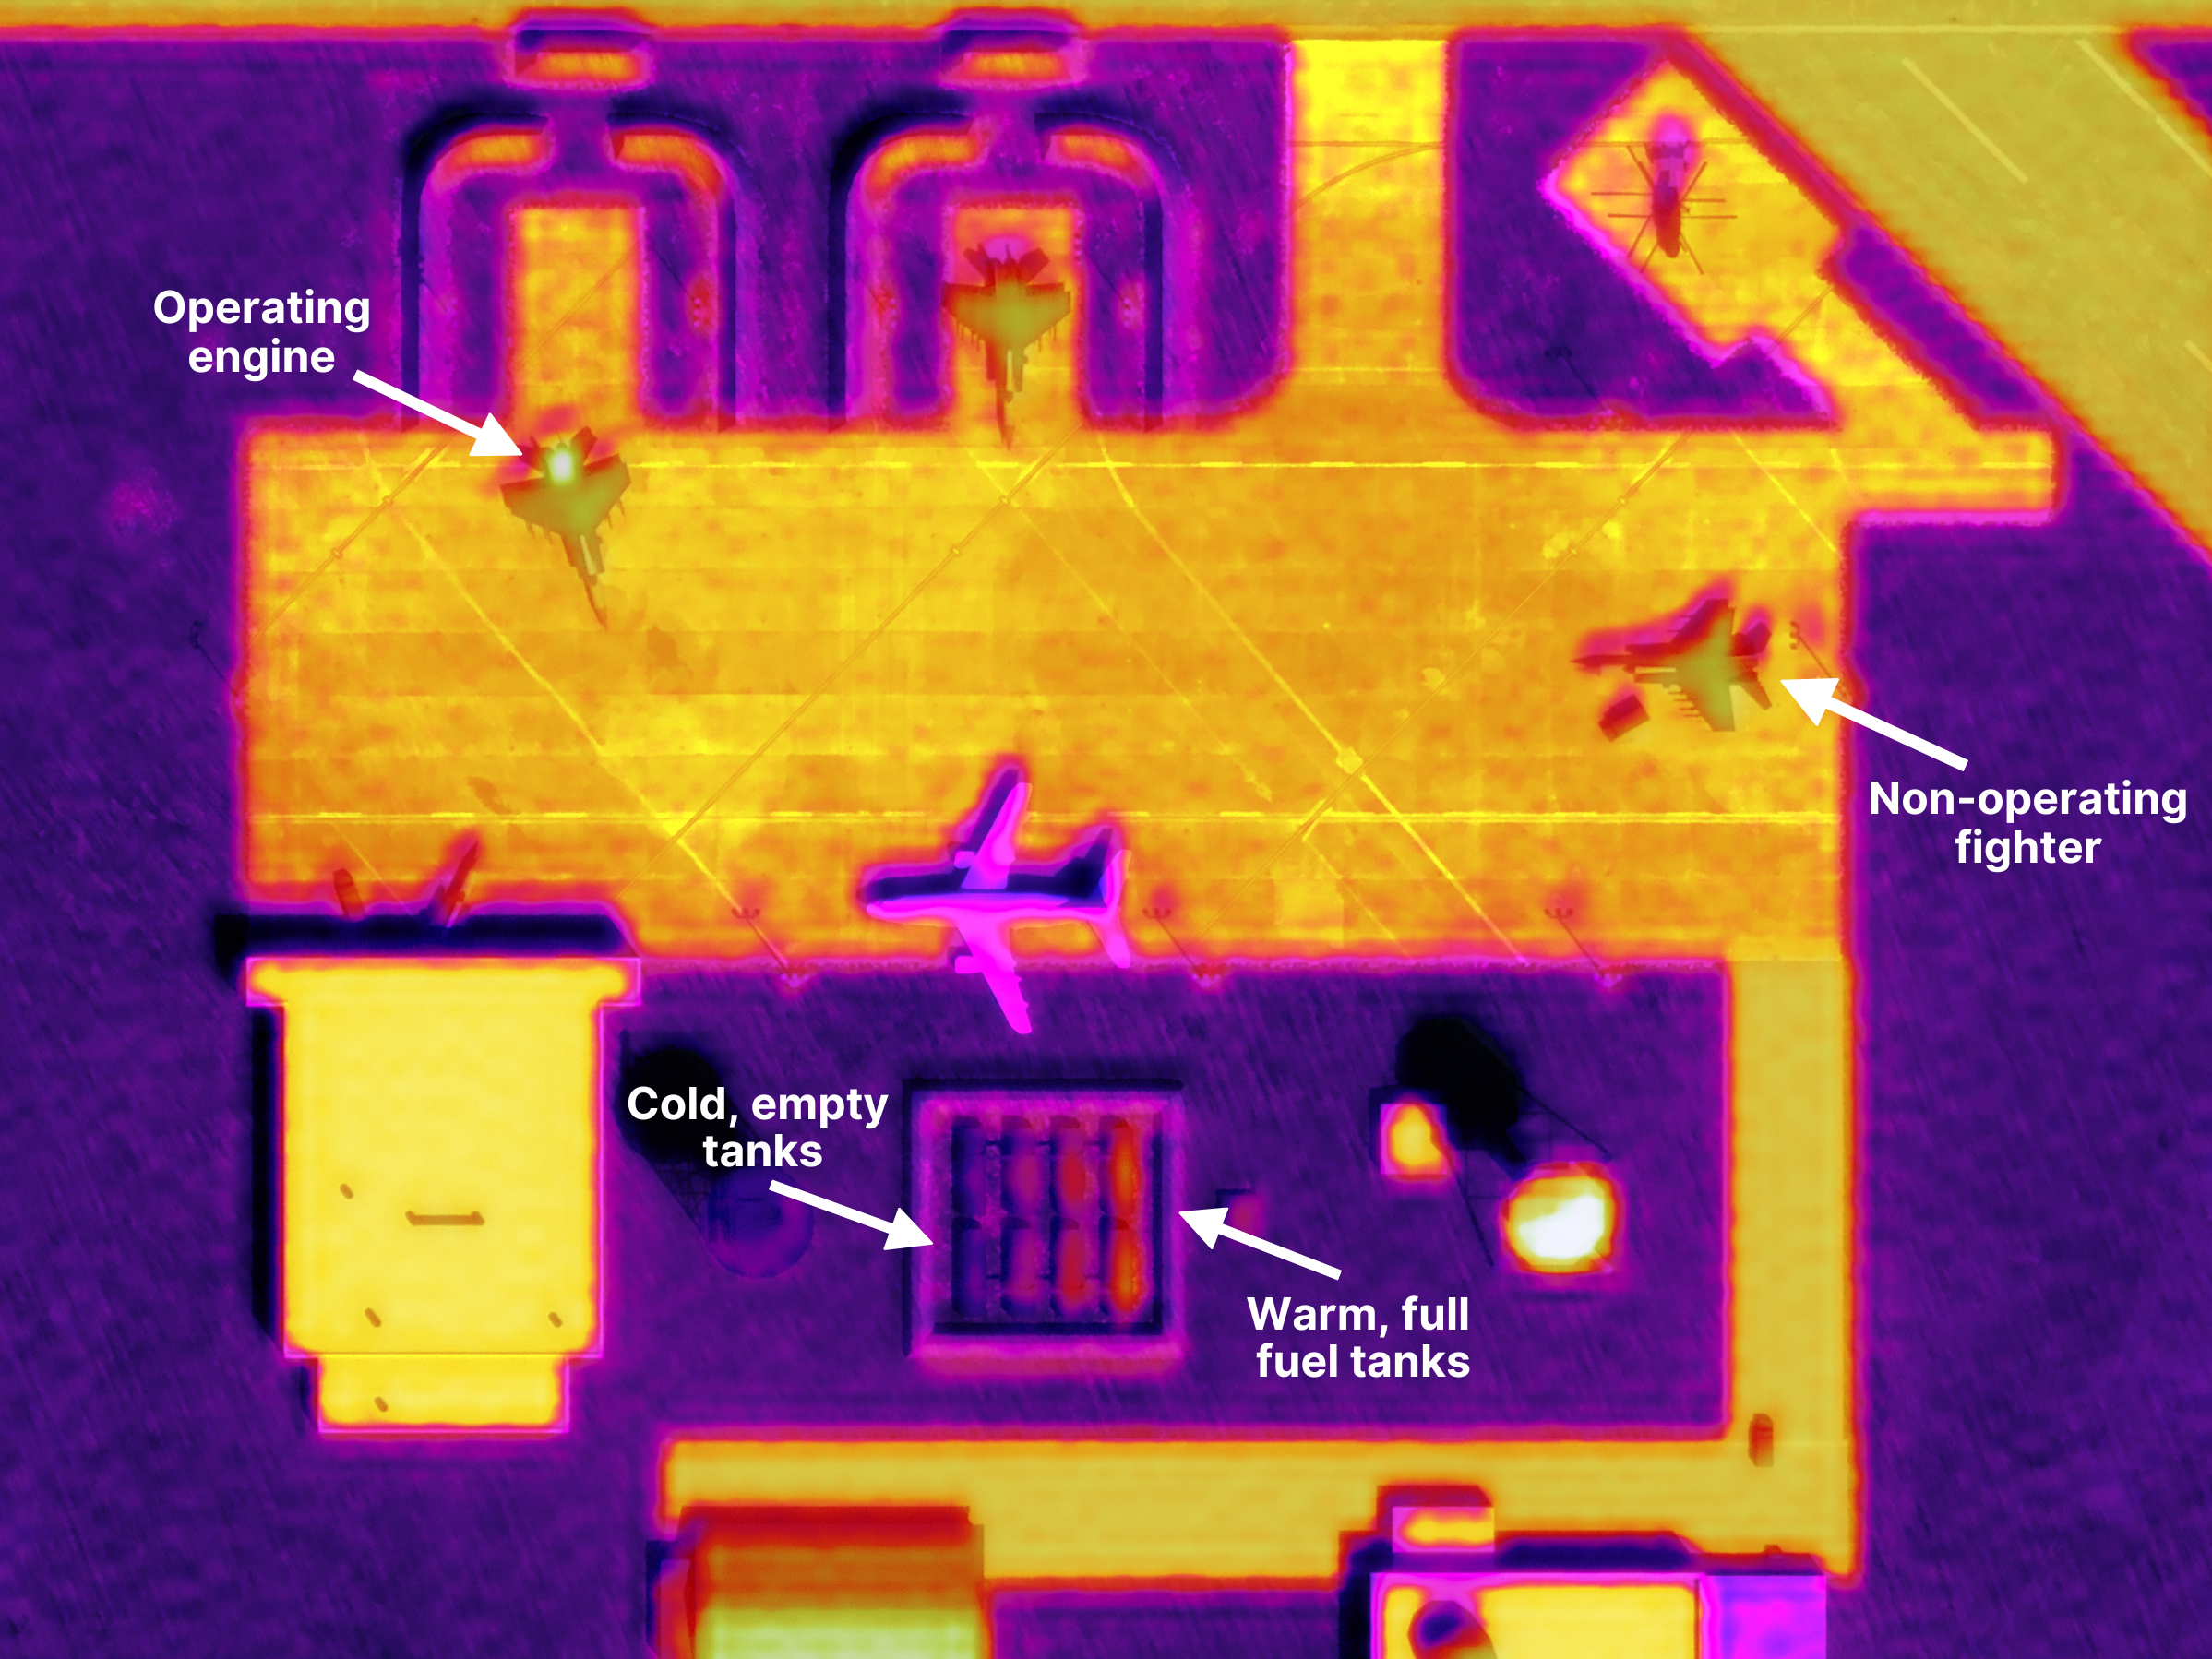 Albedo’s “Vis-Sharpened Thermal” dataset combines visible and thermal imagery to provide temporal information, such as whether an object is active or passive, moving or stationary.